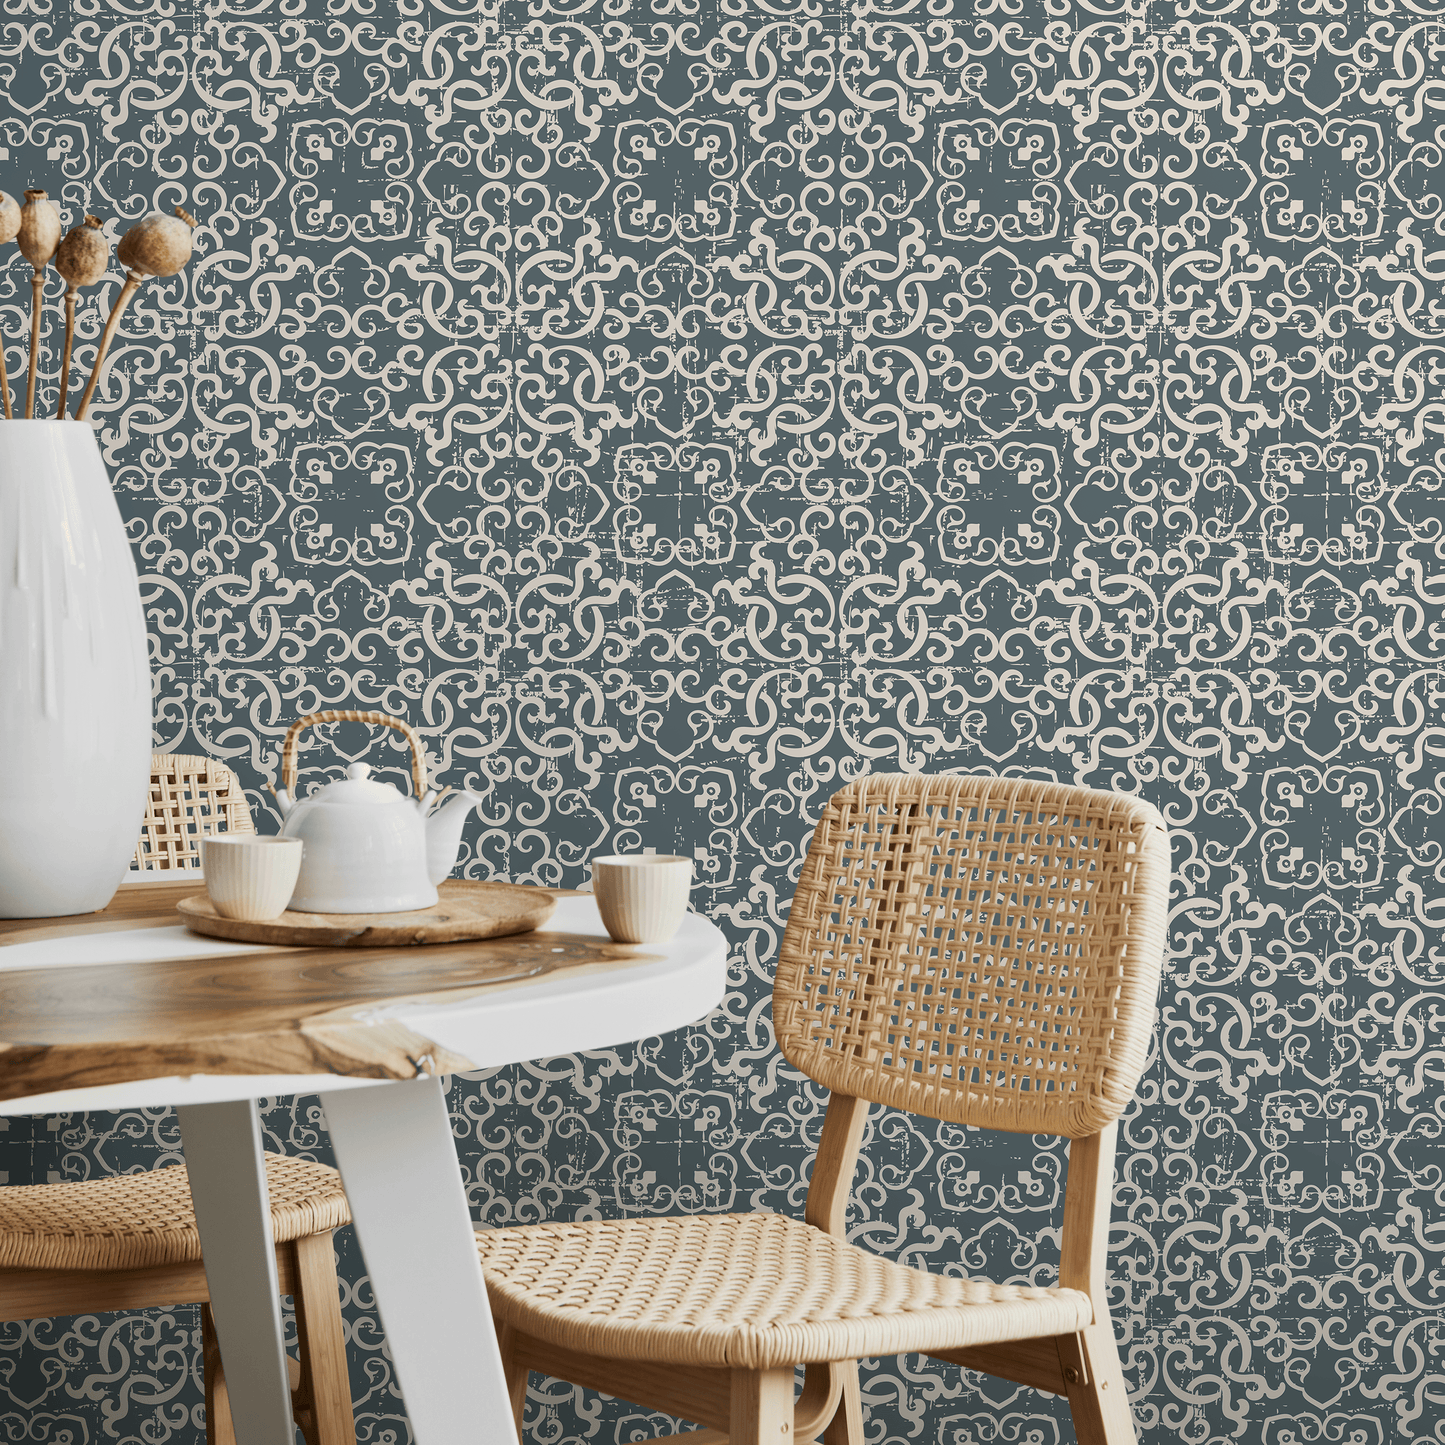 Removable Wallpaper Peel and Stick Wallpaper Wall Paper Wall Mural - Portuguese Azulejos Tile Wallpaper - A554